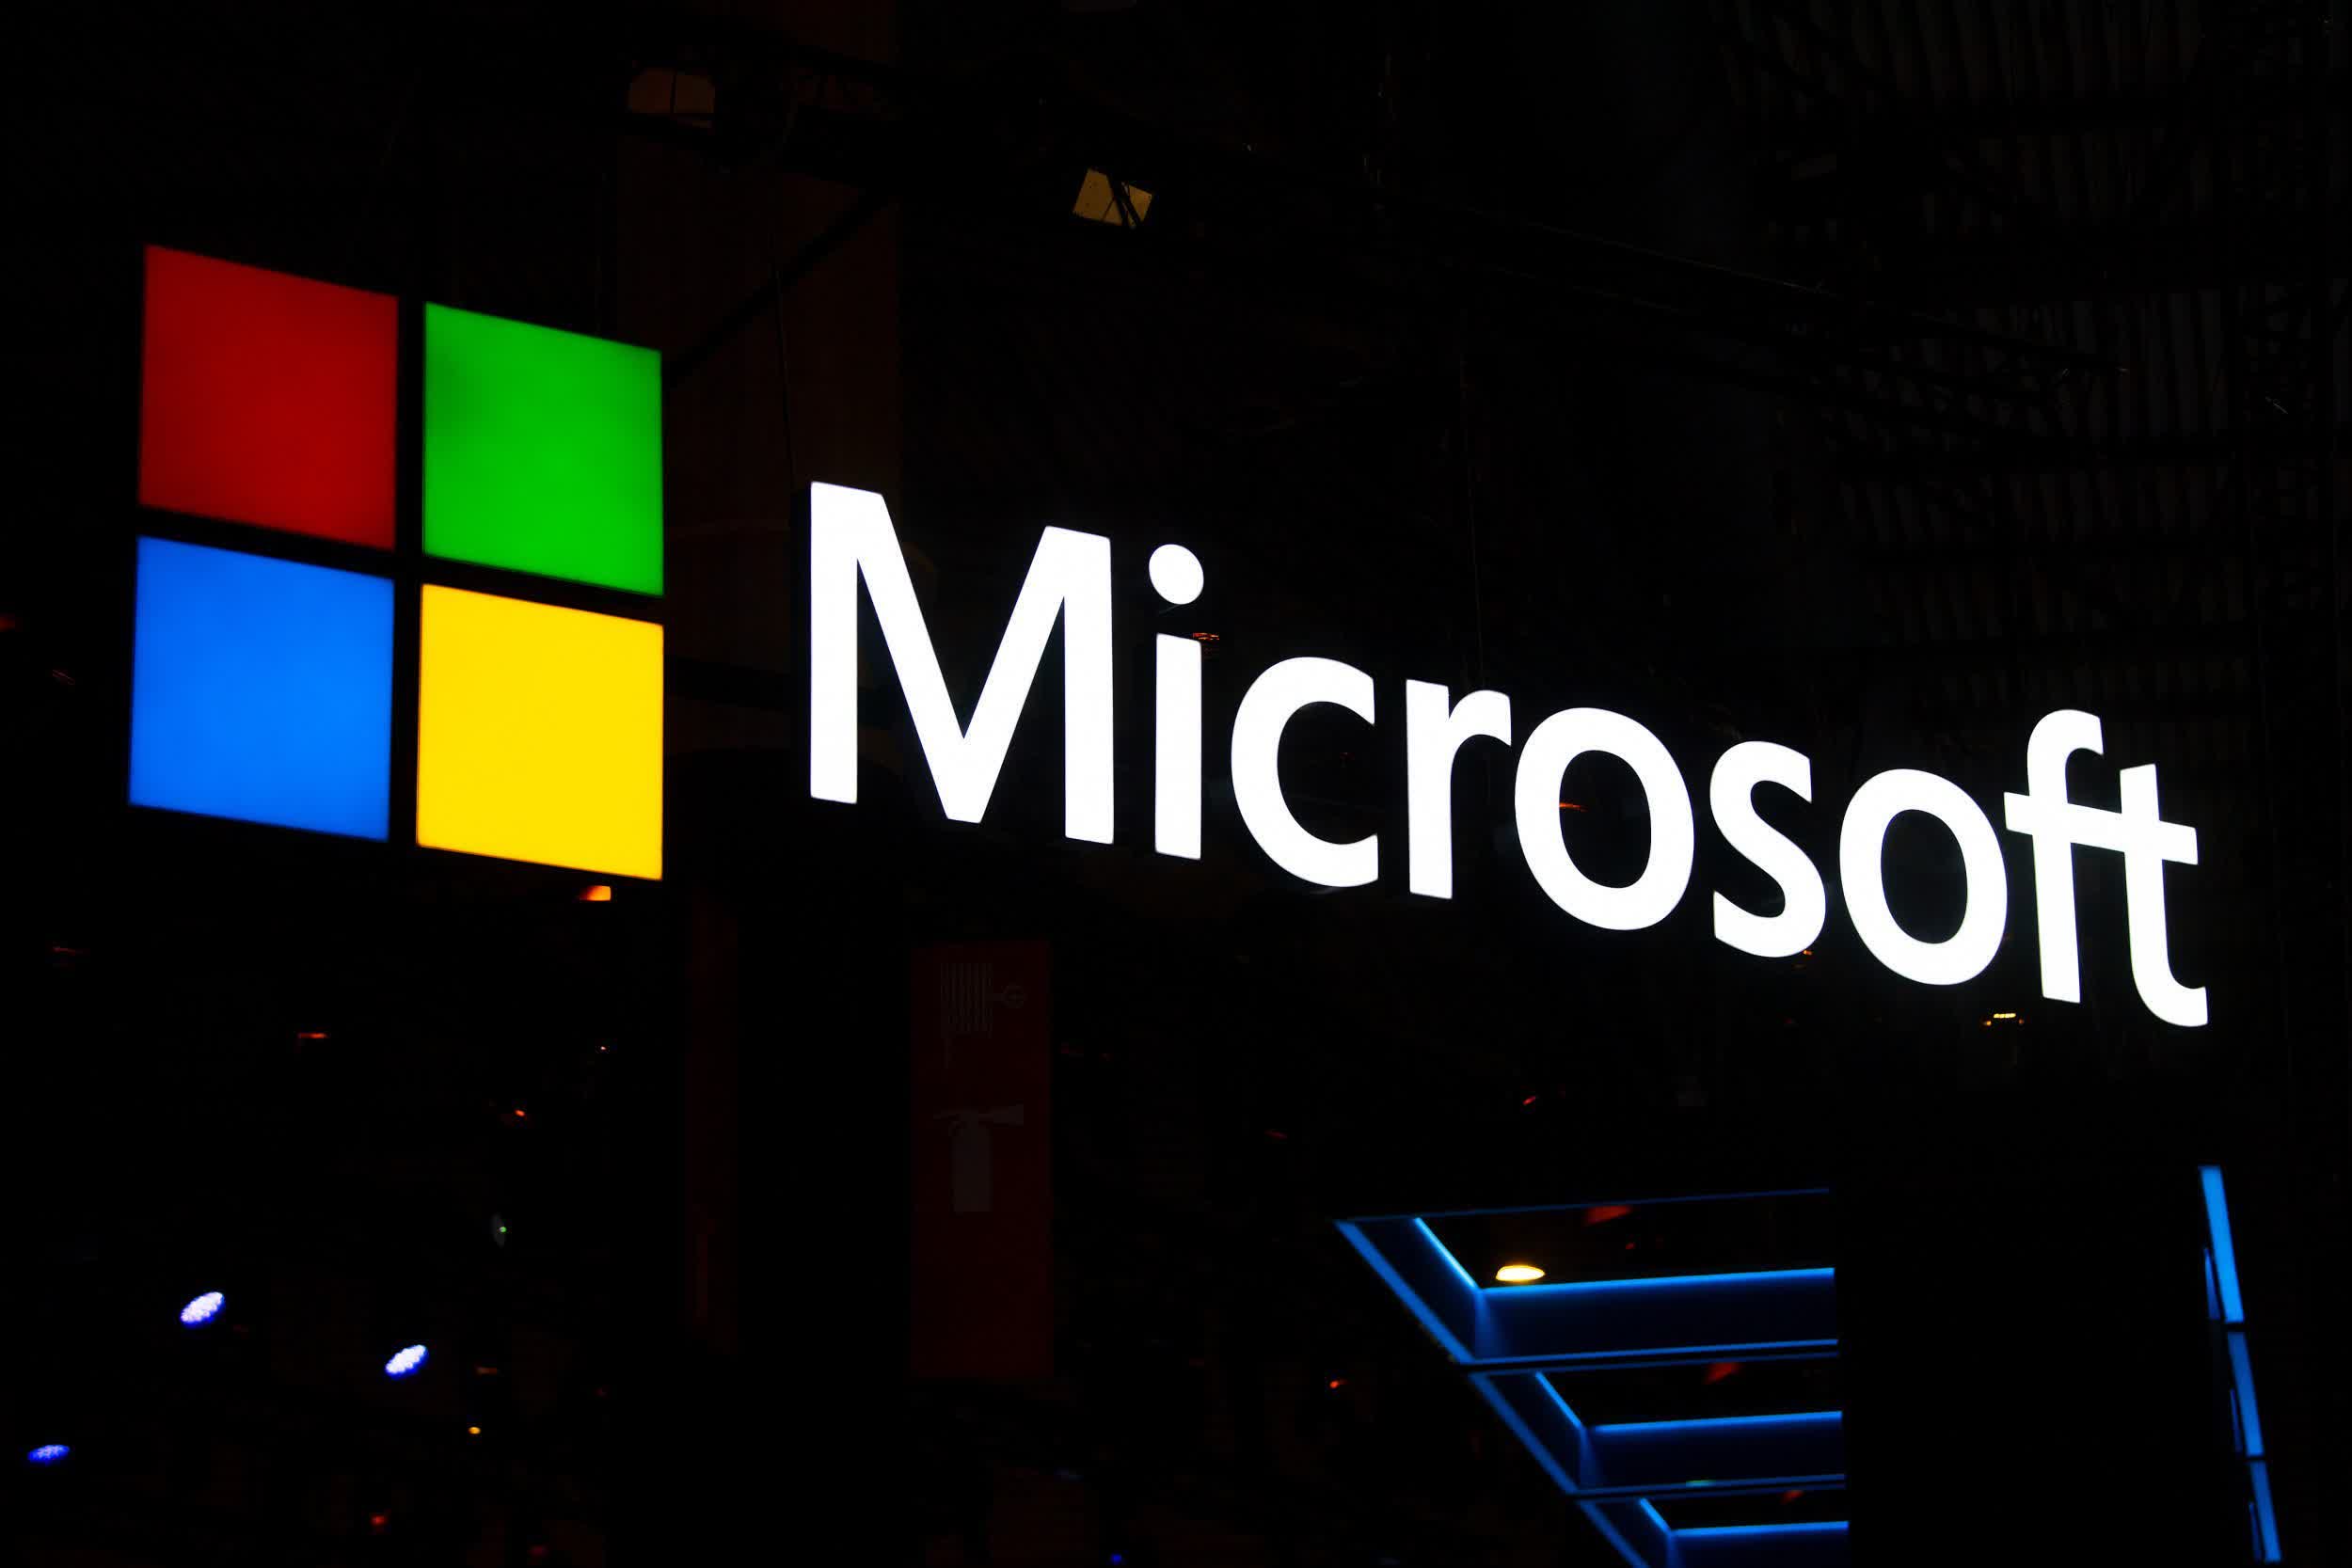 Microsoft releases security updates for critical Windows exploits